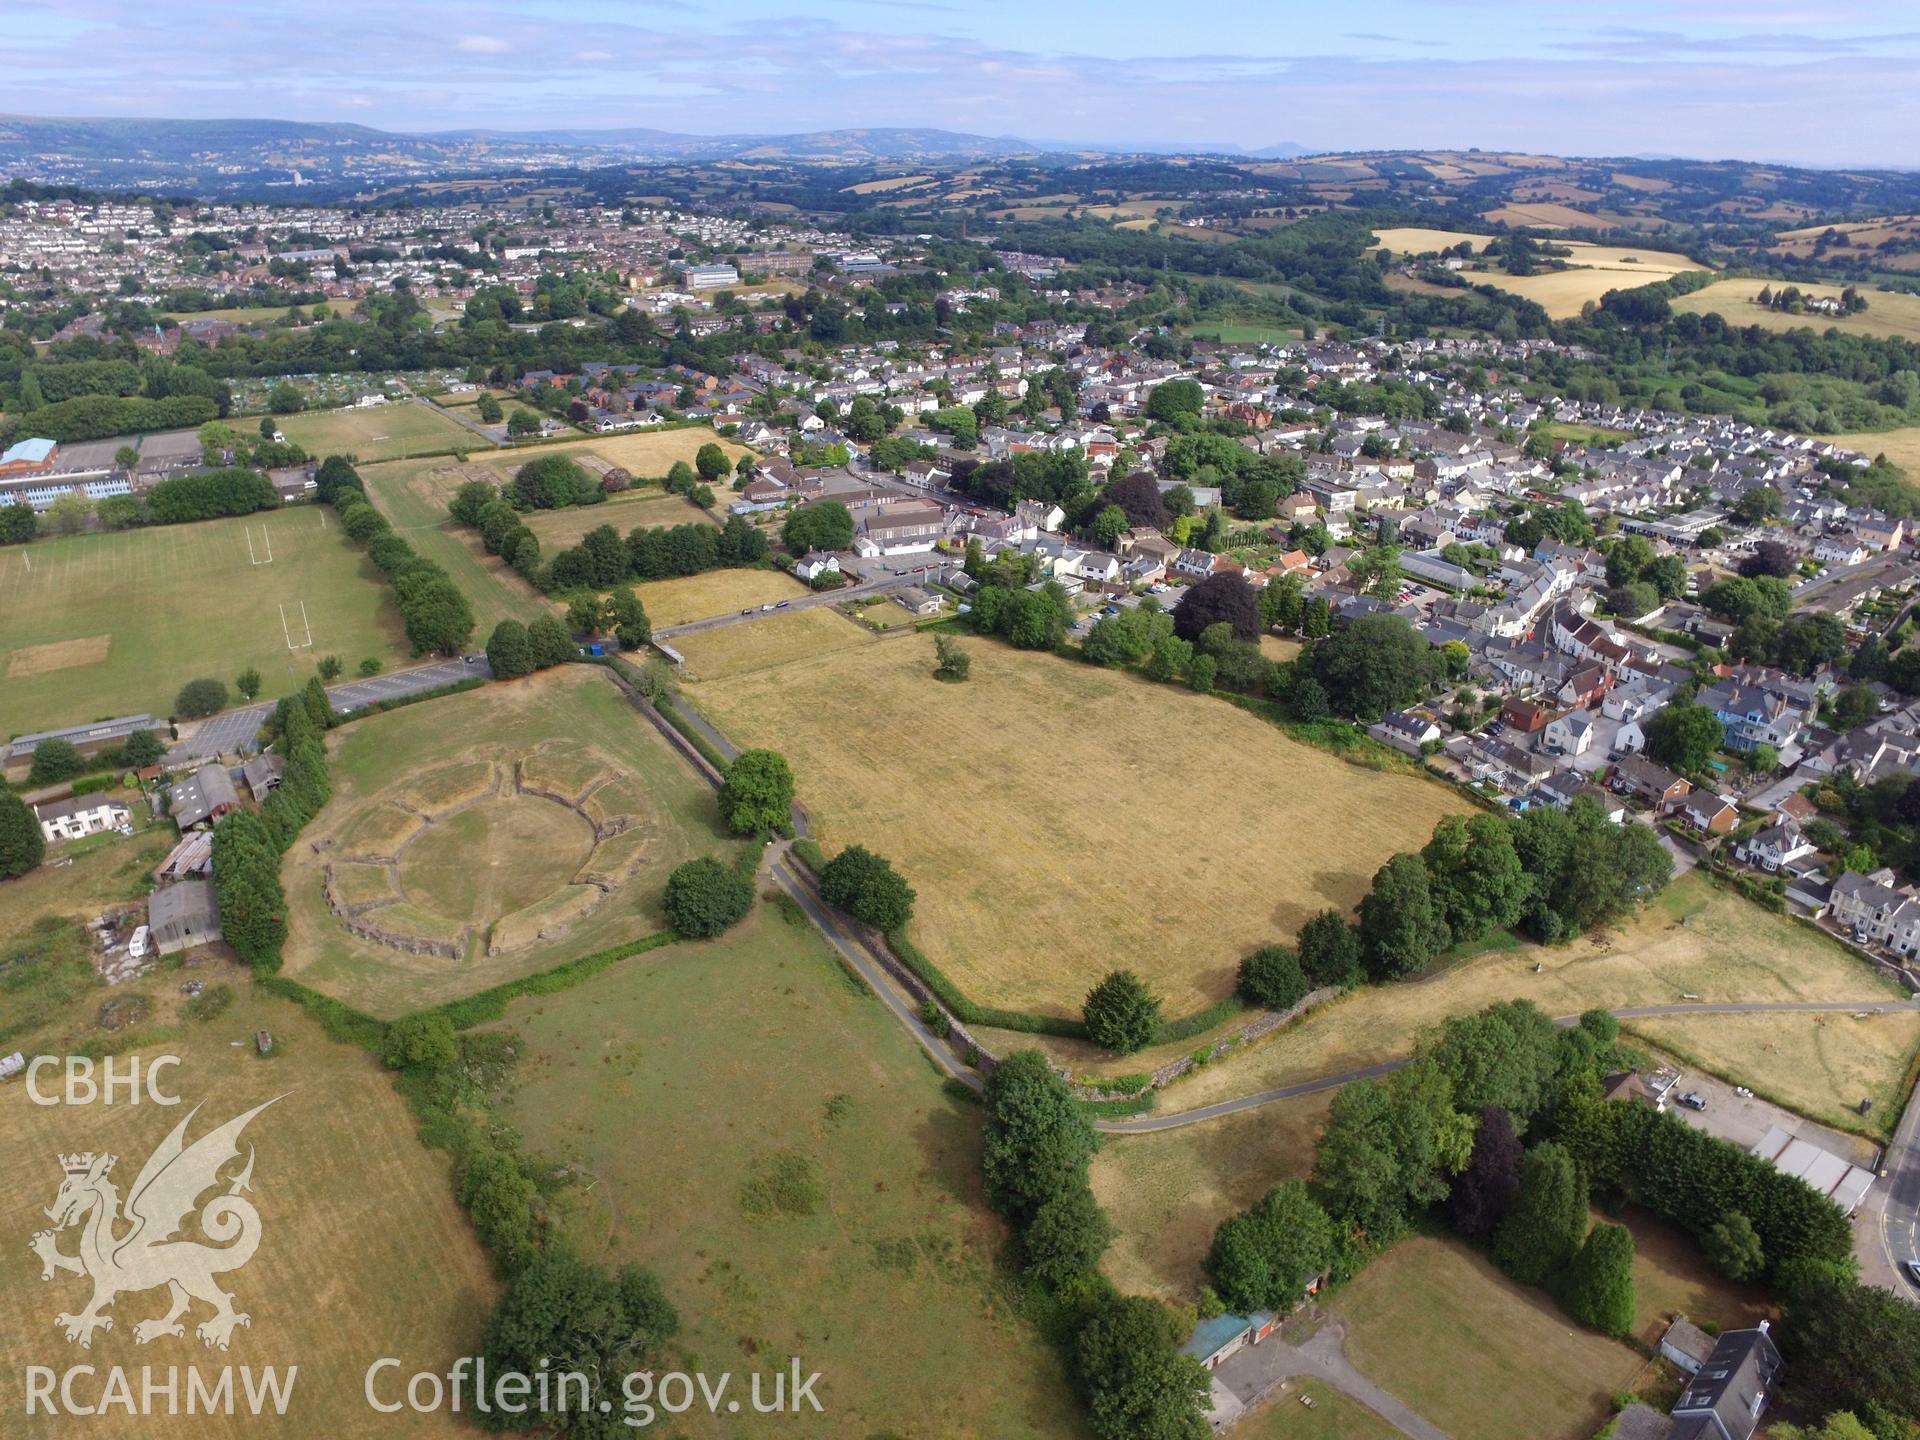 Colour photograph showing the remains of Isca Leginary Fortress including the Roman amphitheatre, with views of Caerleon town beyond. Taken by Paul R. Davis on 22nd July 2018.